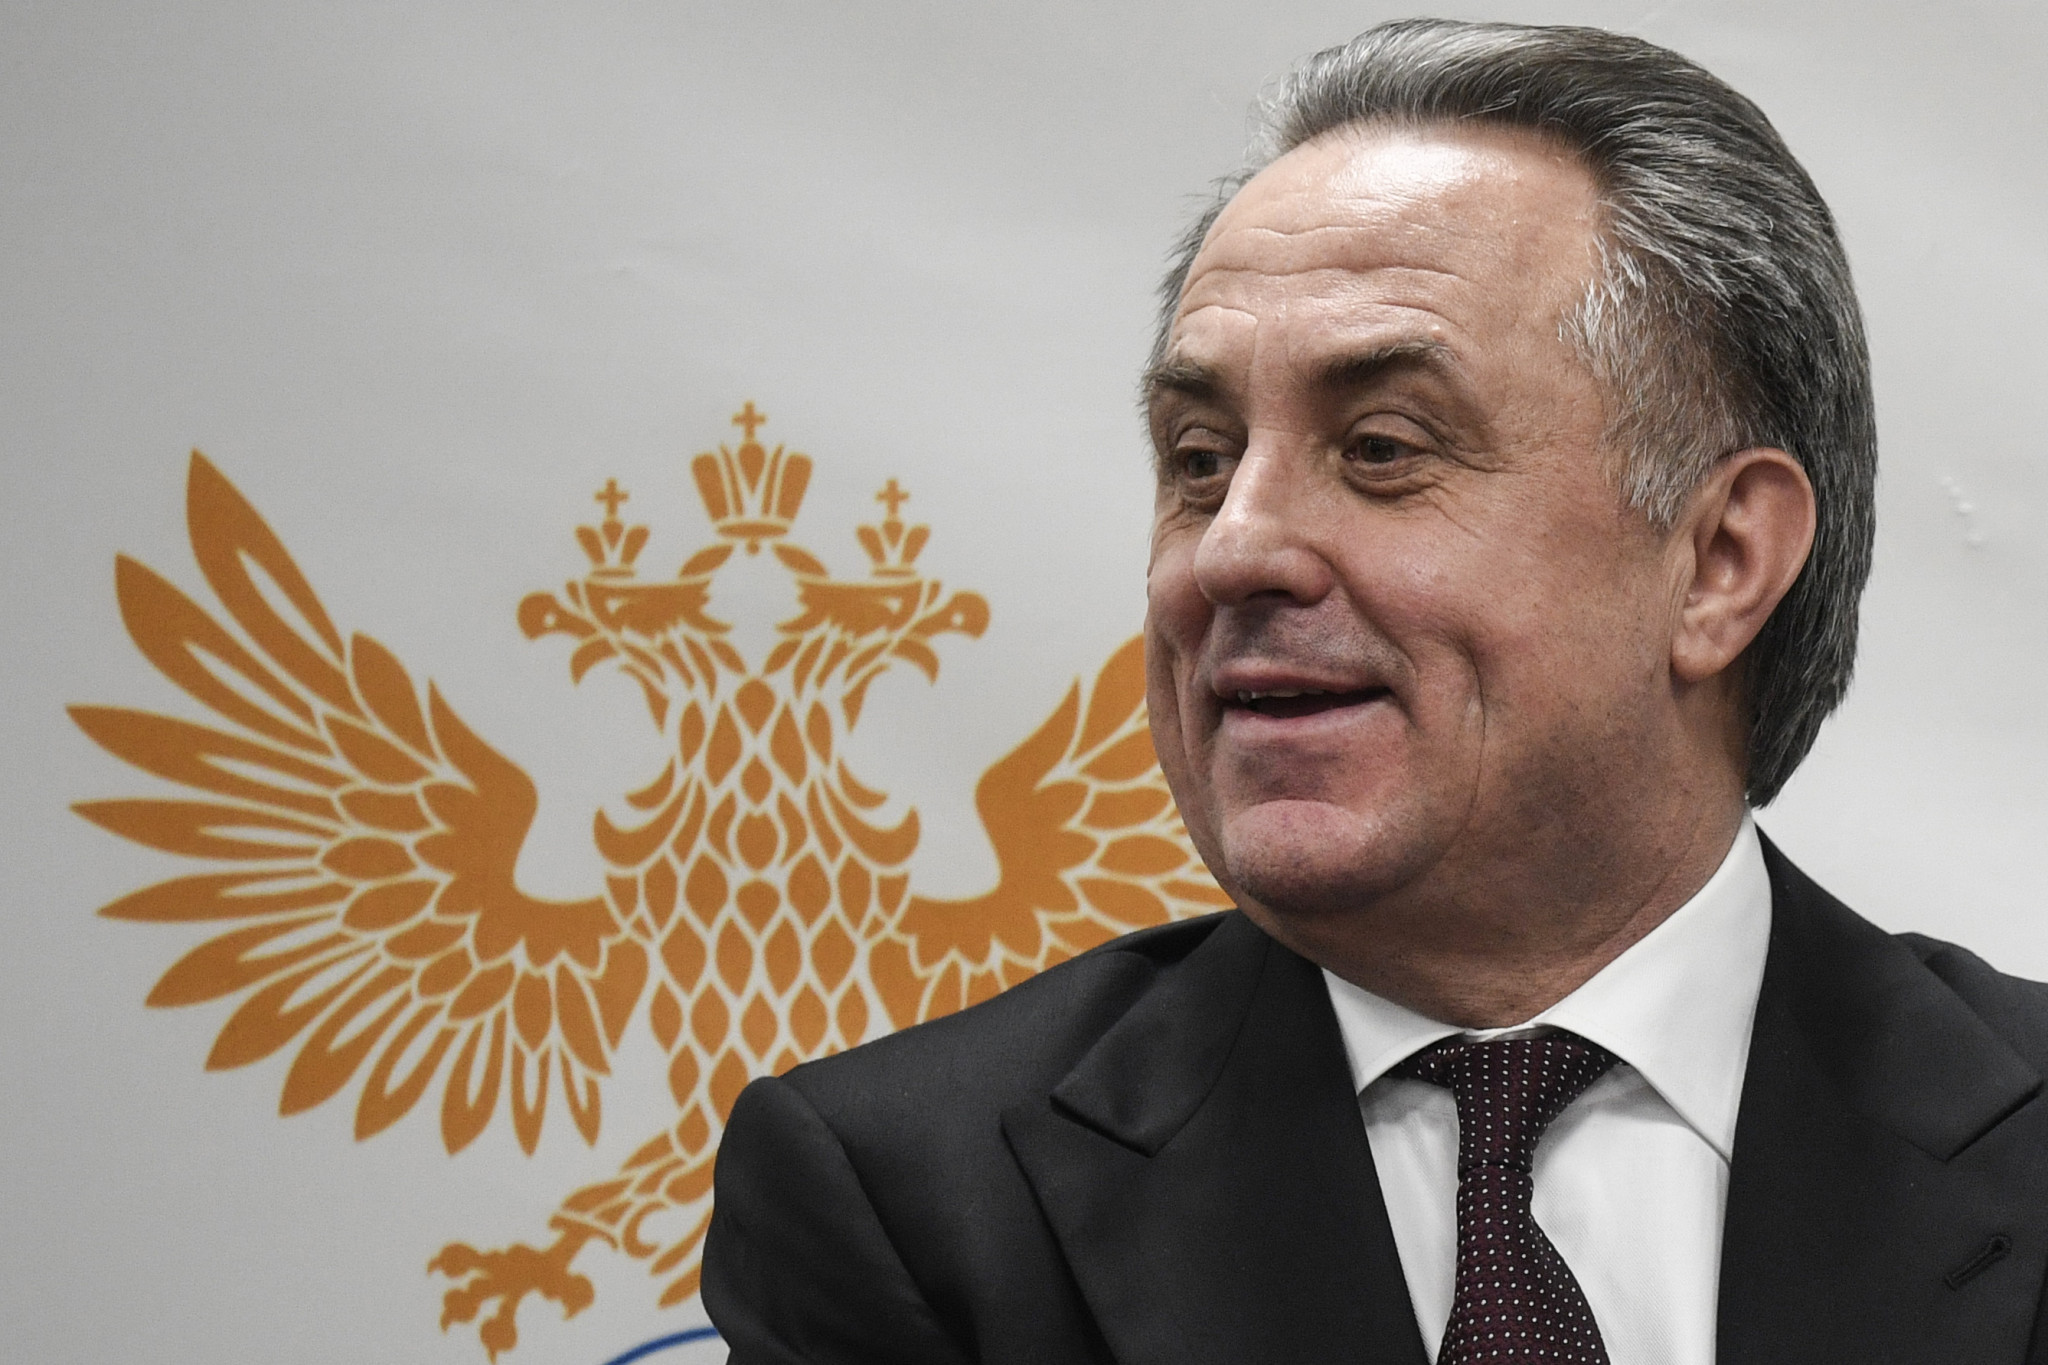 Russian Deputy Prime Minister and former Sports Minister Vitaly Mutko had revealed in February that Ruslan Kambolov was the subject of an anti-doping investigation ©Getty Images